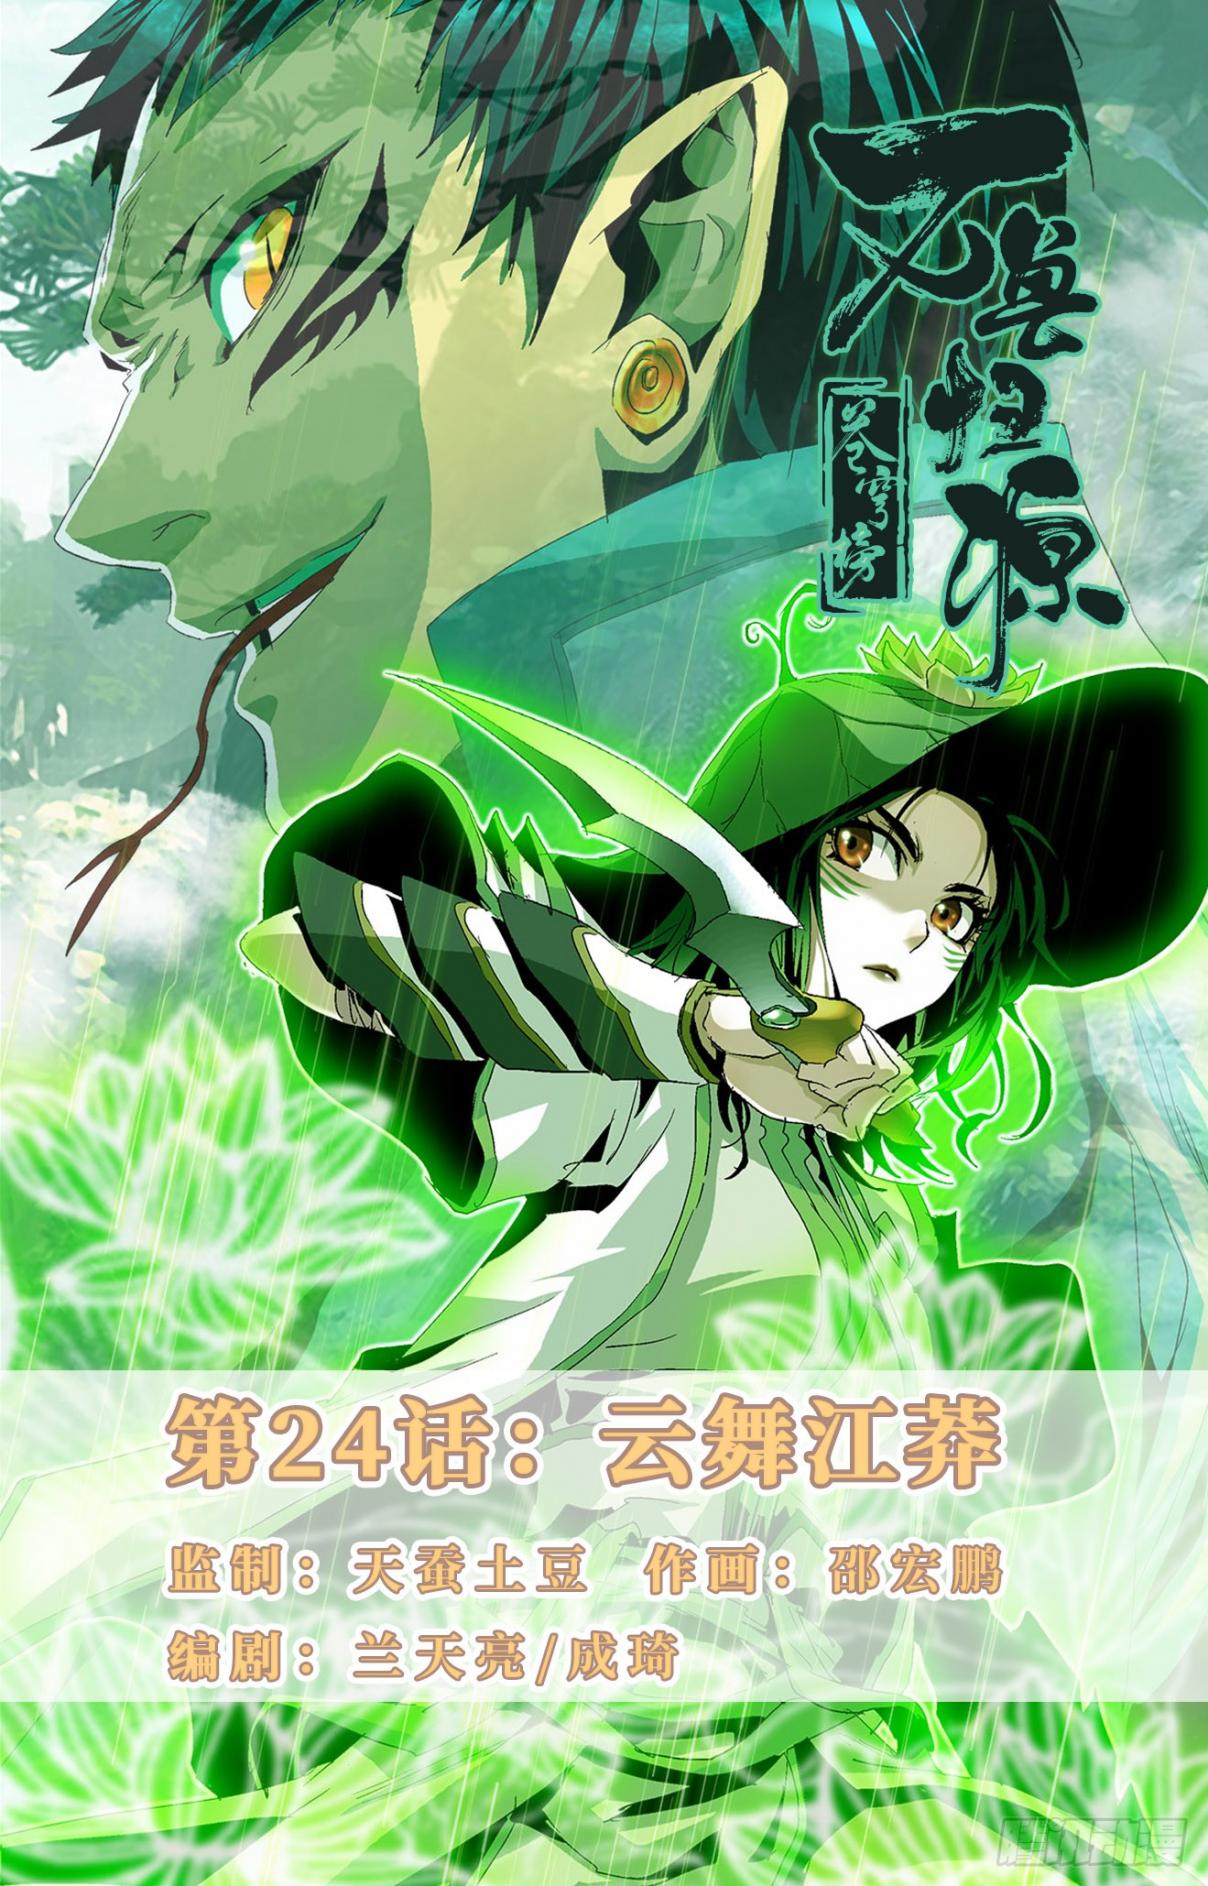 Fights Break Sphere – Return of the Beasts Ch. 24 Yun Wu and Jiang Mang